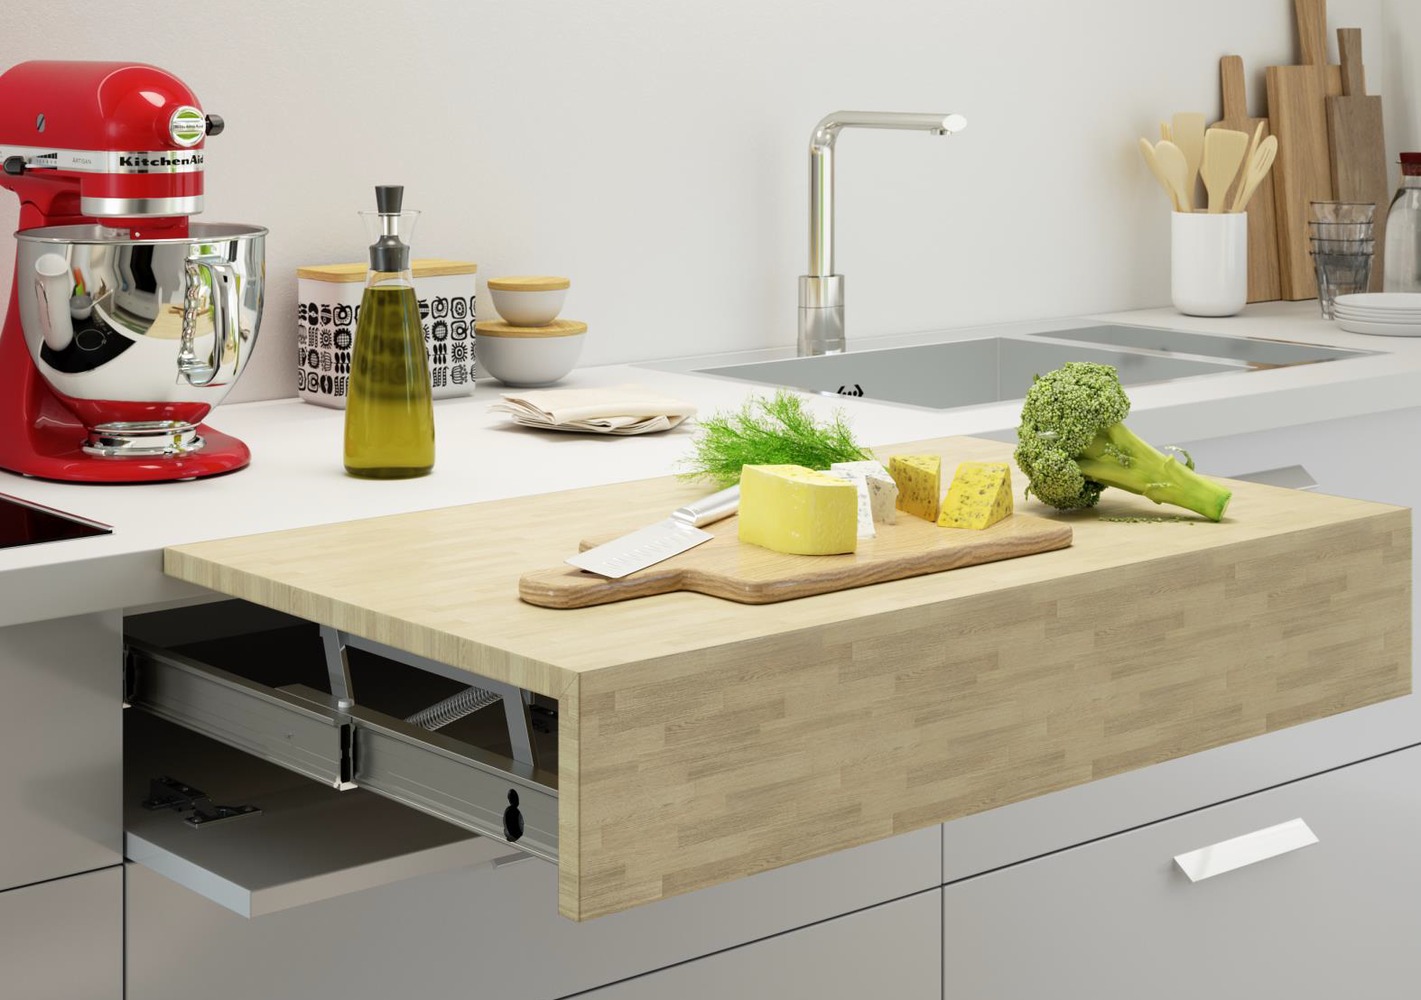 Use Multifunctional Furniture in the Kitchen